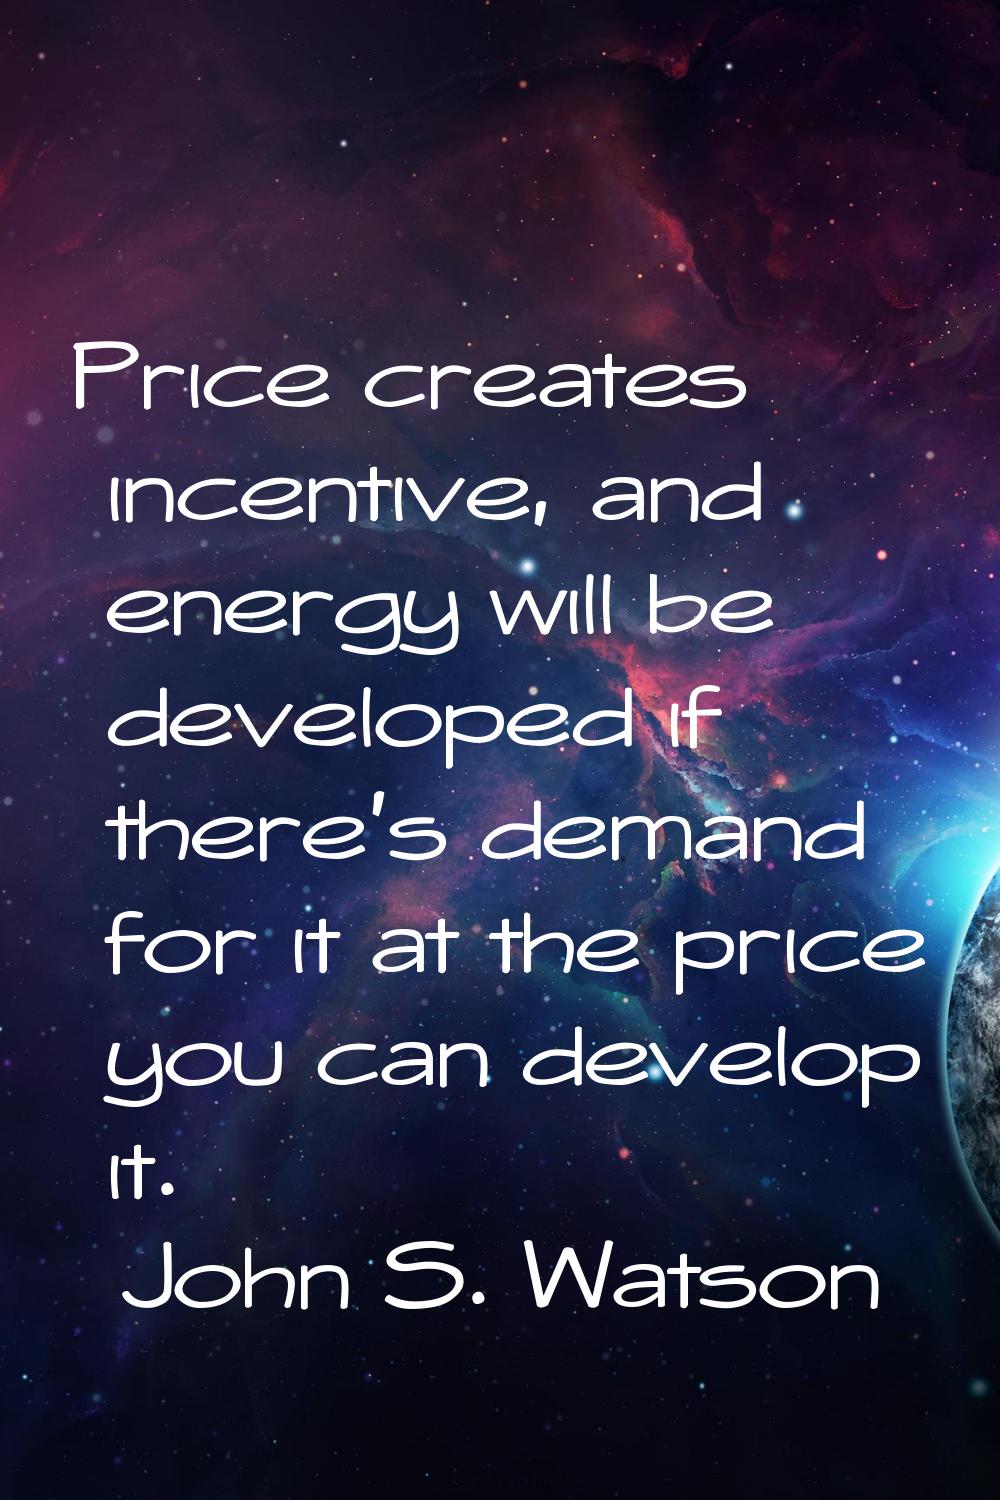 Price creates incentive, and energy will be developed if there's demand for it at the price you can